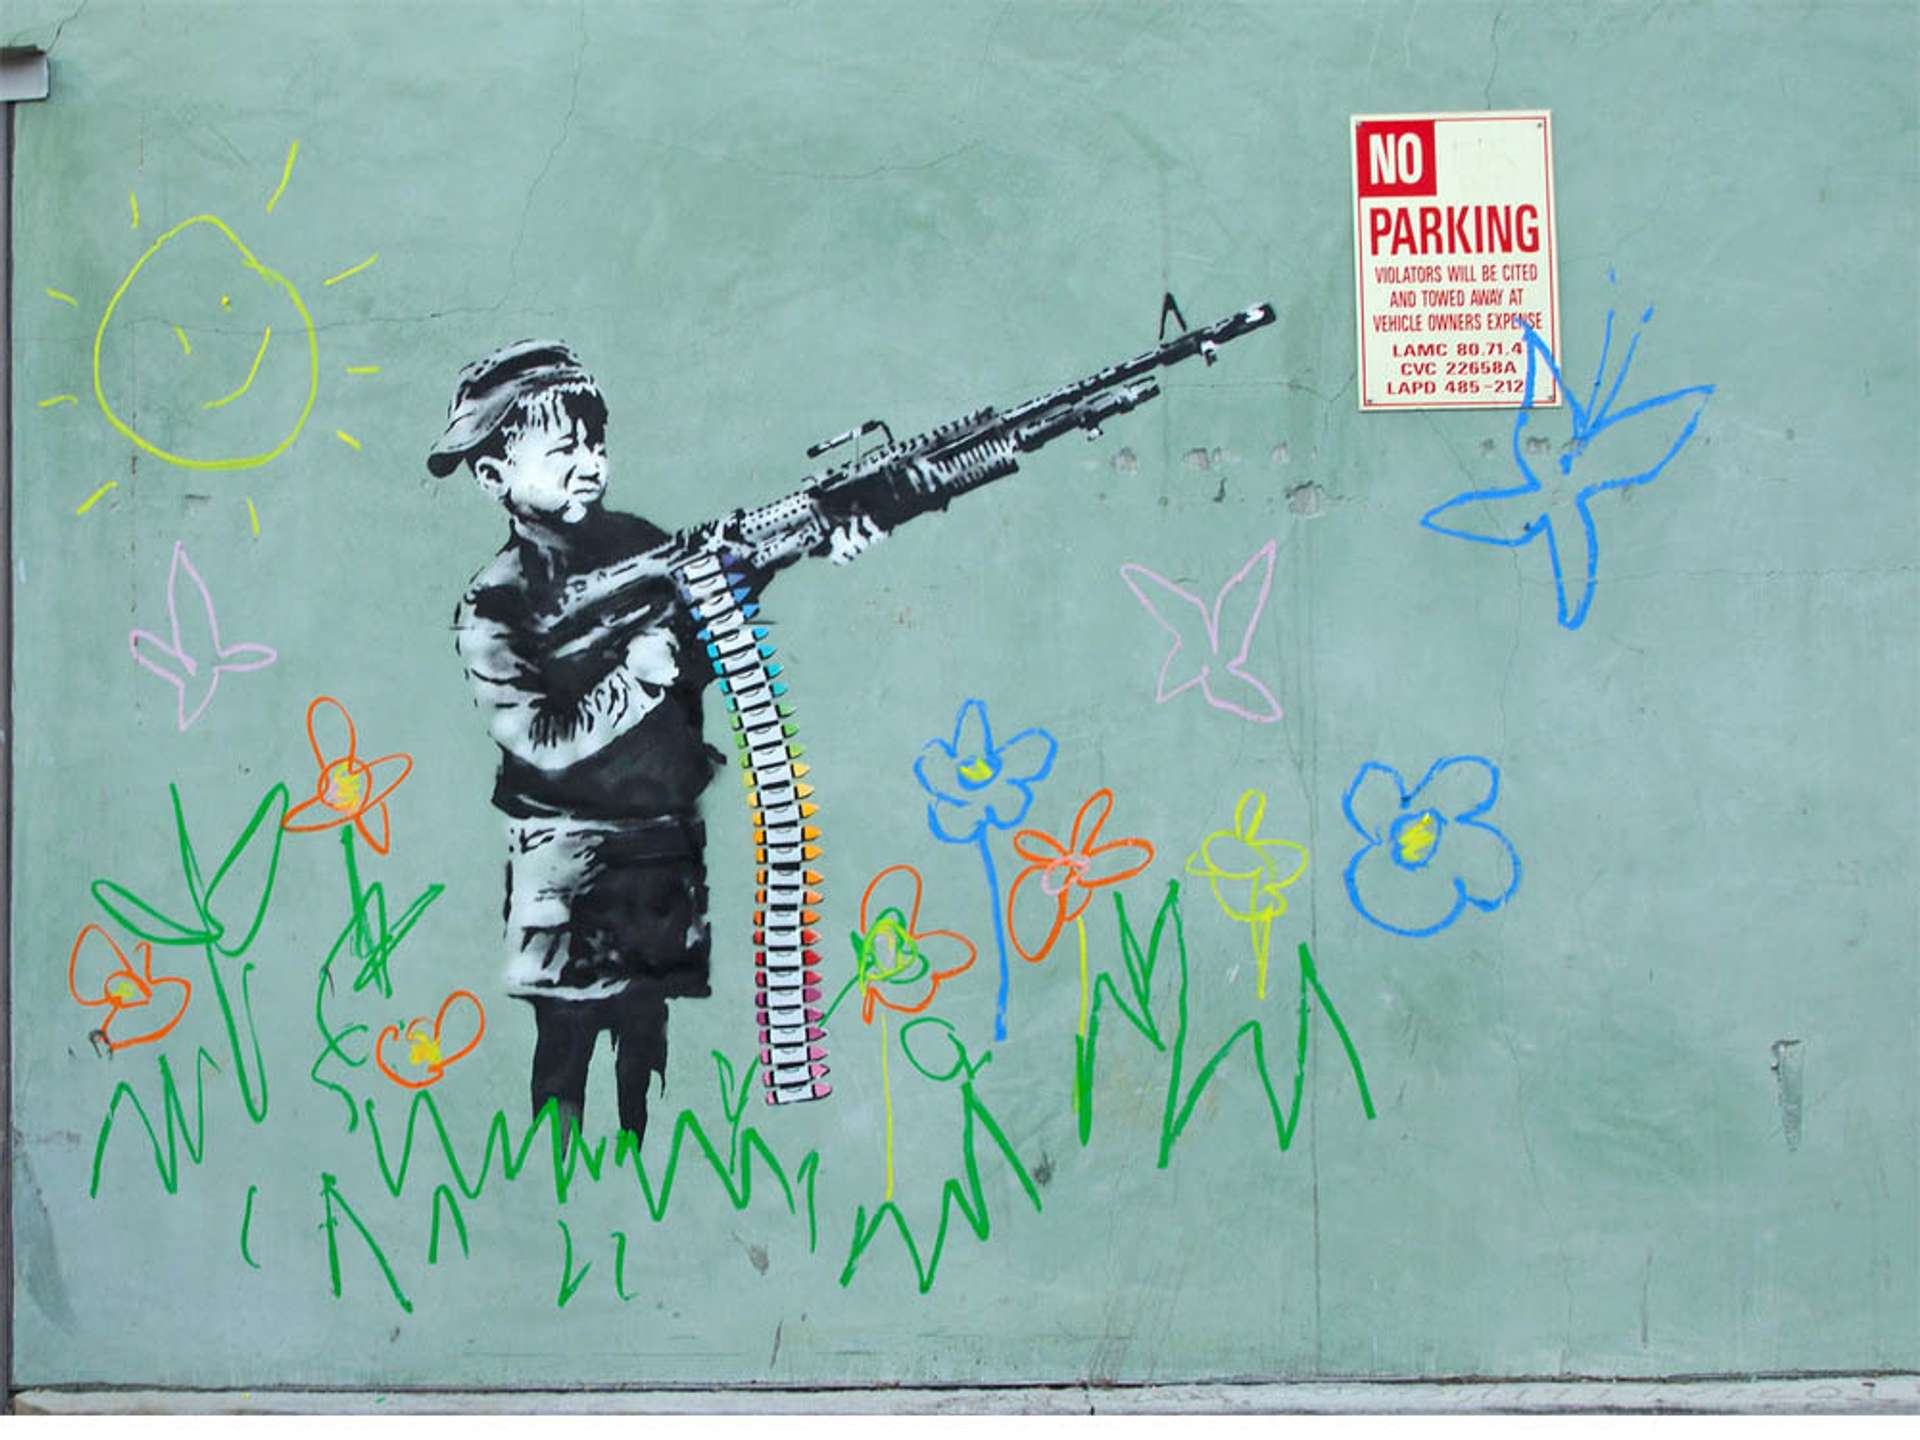 An image of the mural Crayon Boy by Banksy. It shows a monochrome young boy holding a machine gun, but its cartridges are made of crayons. Around him, are child-like depictions of nature such as flowers and a smiling sun.